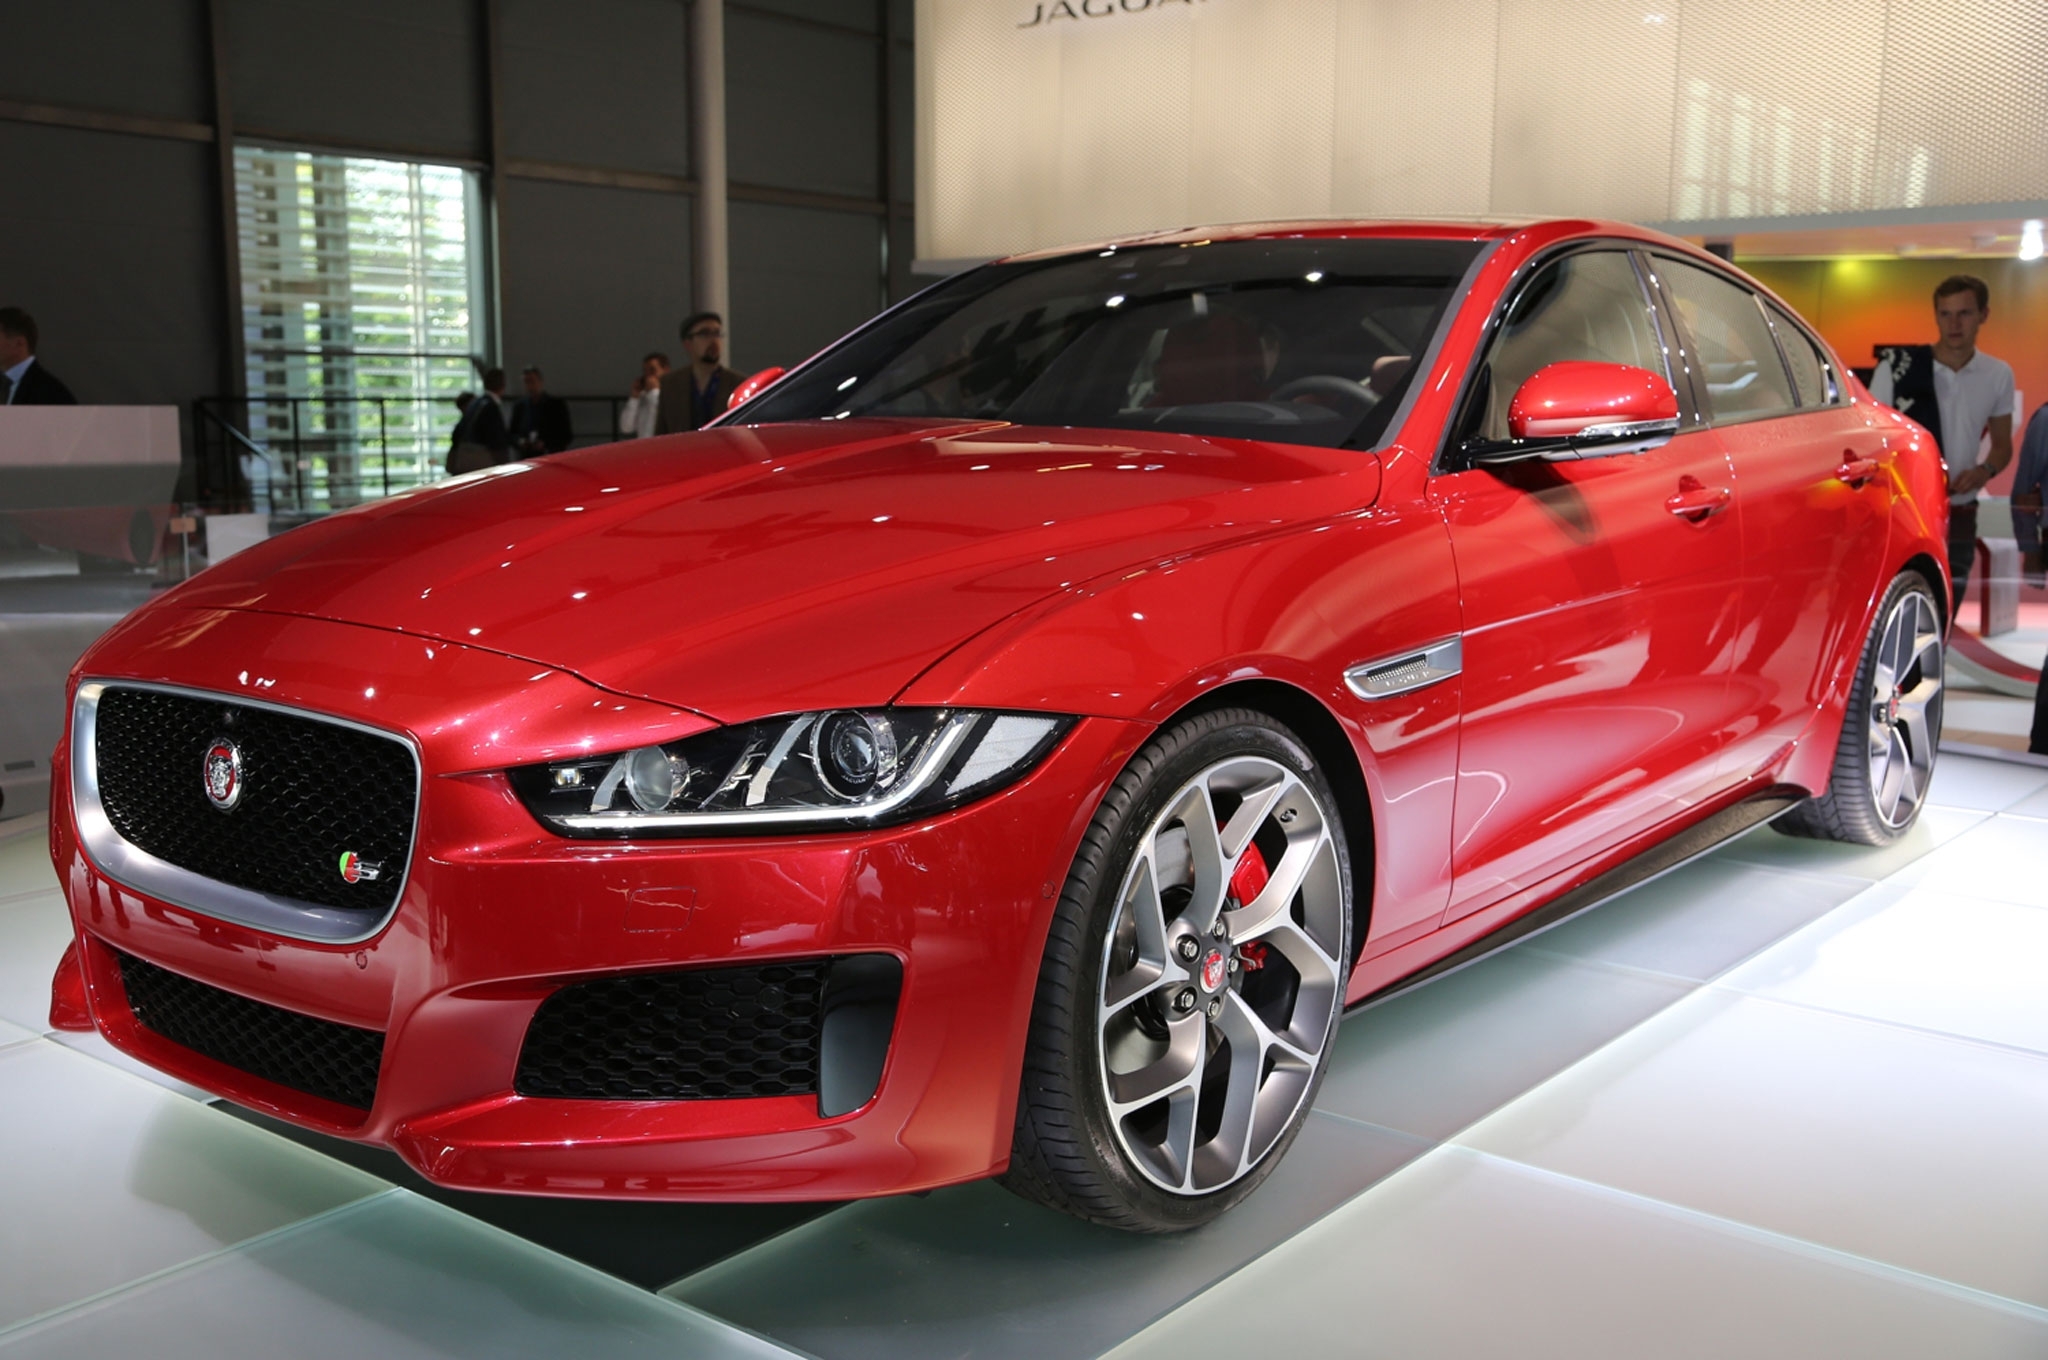 Paris Motor Shows Previews – Audi A6 and Peugeot 308 GT Added to Bill